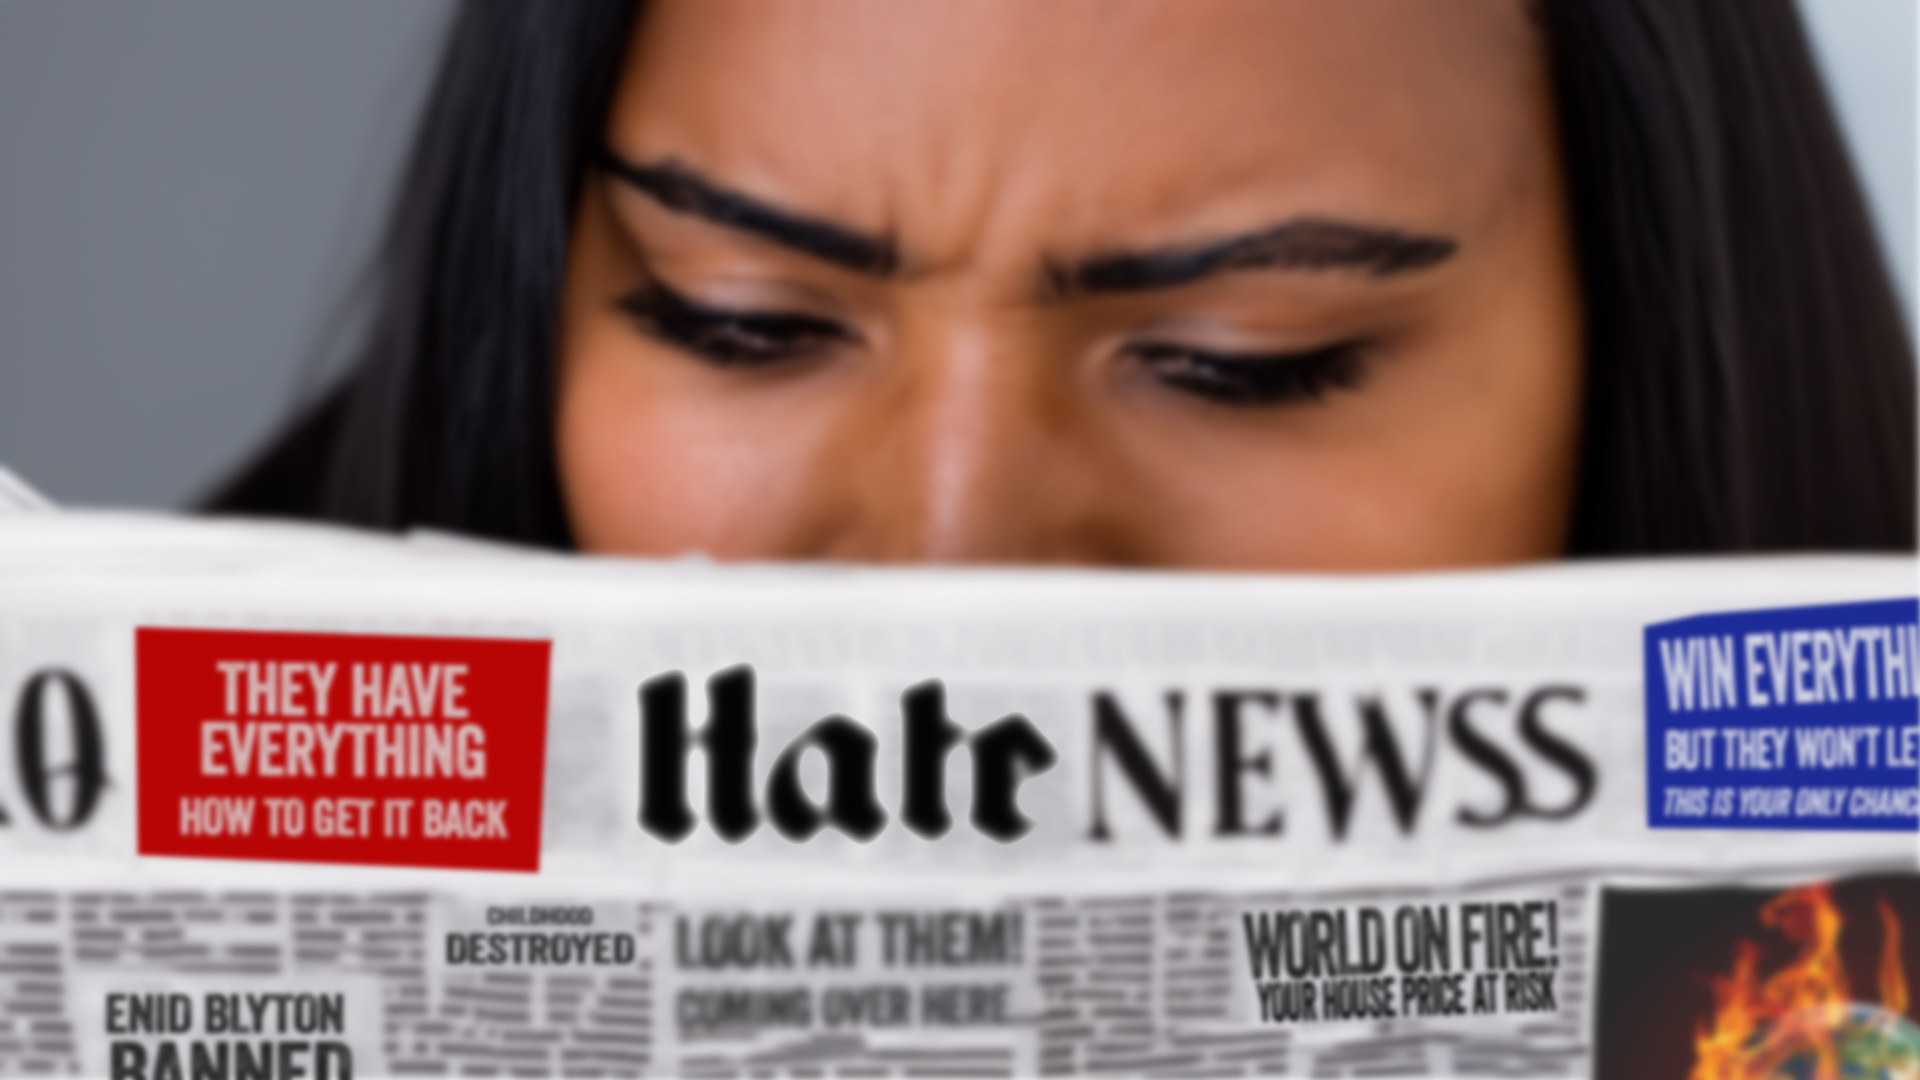 Holding up a copy of Hate News, a frowning reader feels the weight of the world on her shoulders